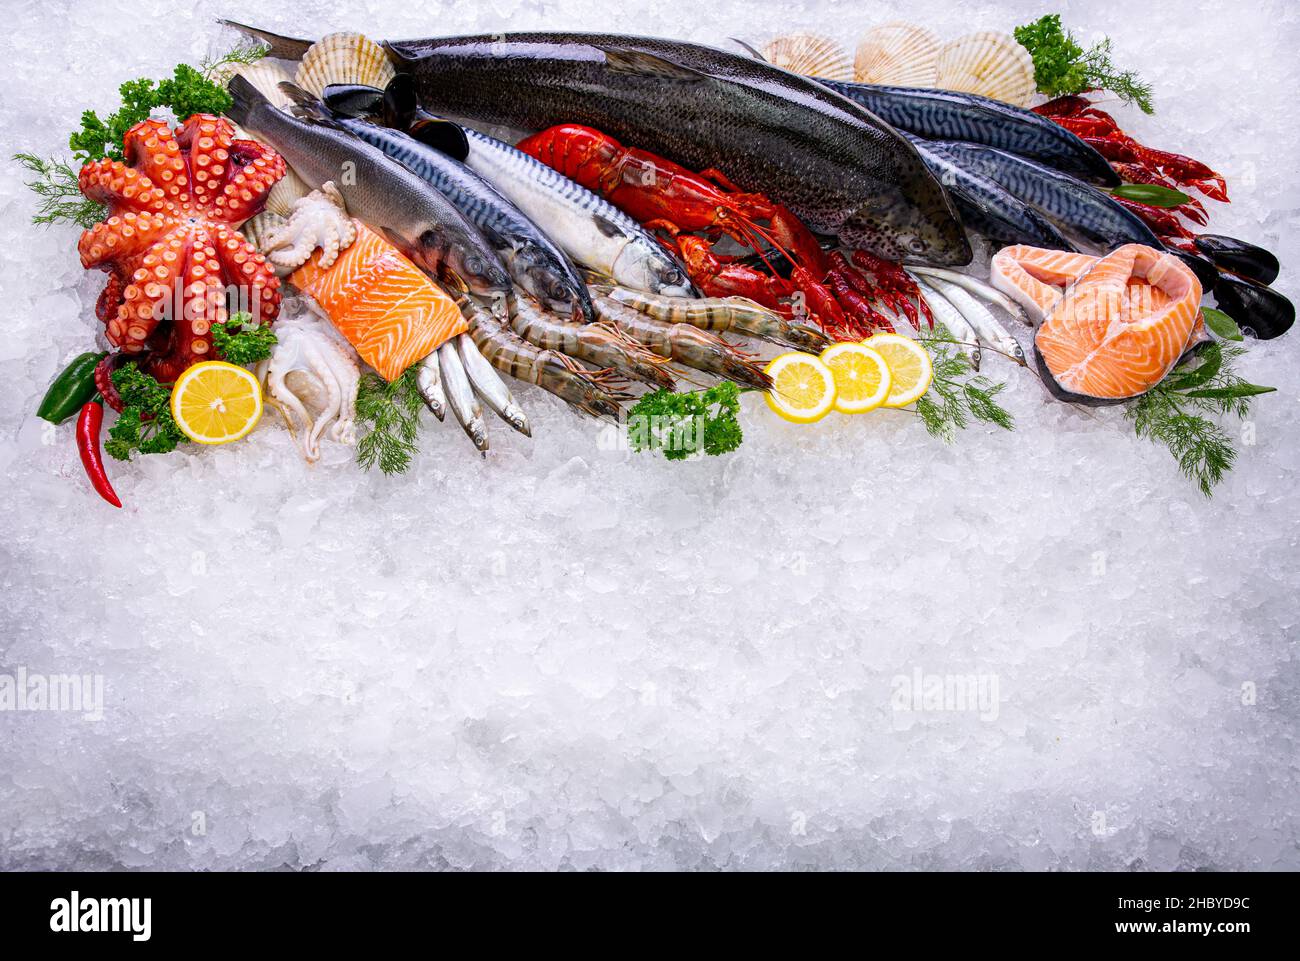 Seafood raw material with overhead view on the ice.Top view frozen mediterranean food and ingreident herb such as lemon ,dill, parsley. Stock Photo